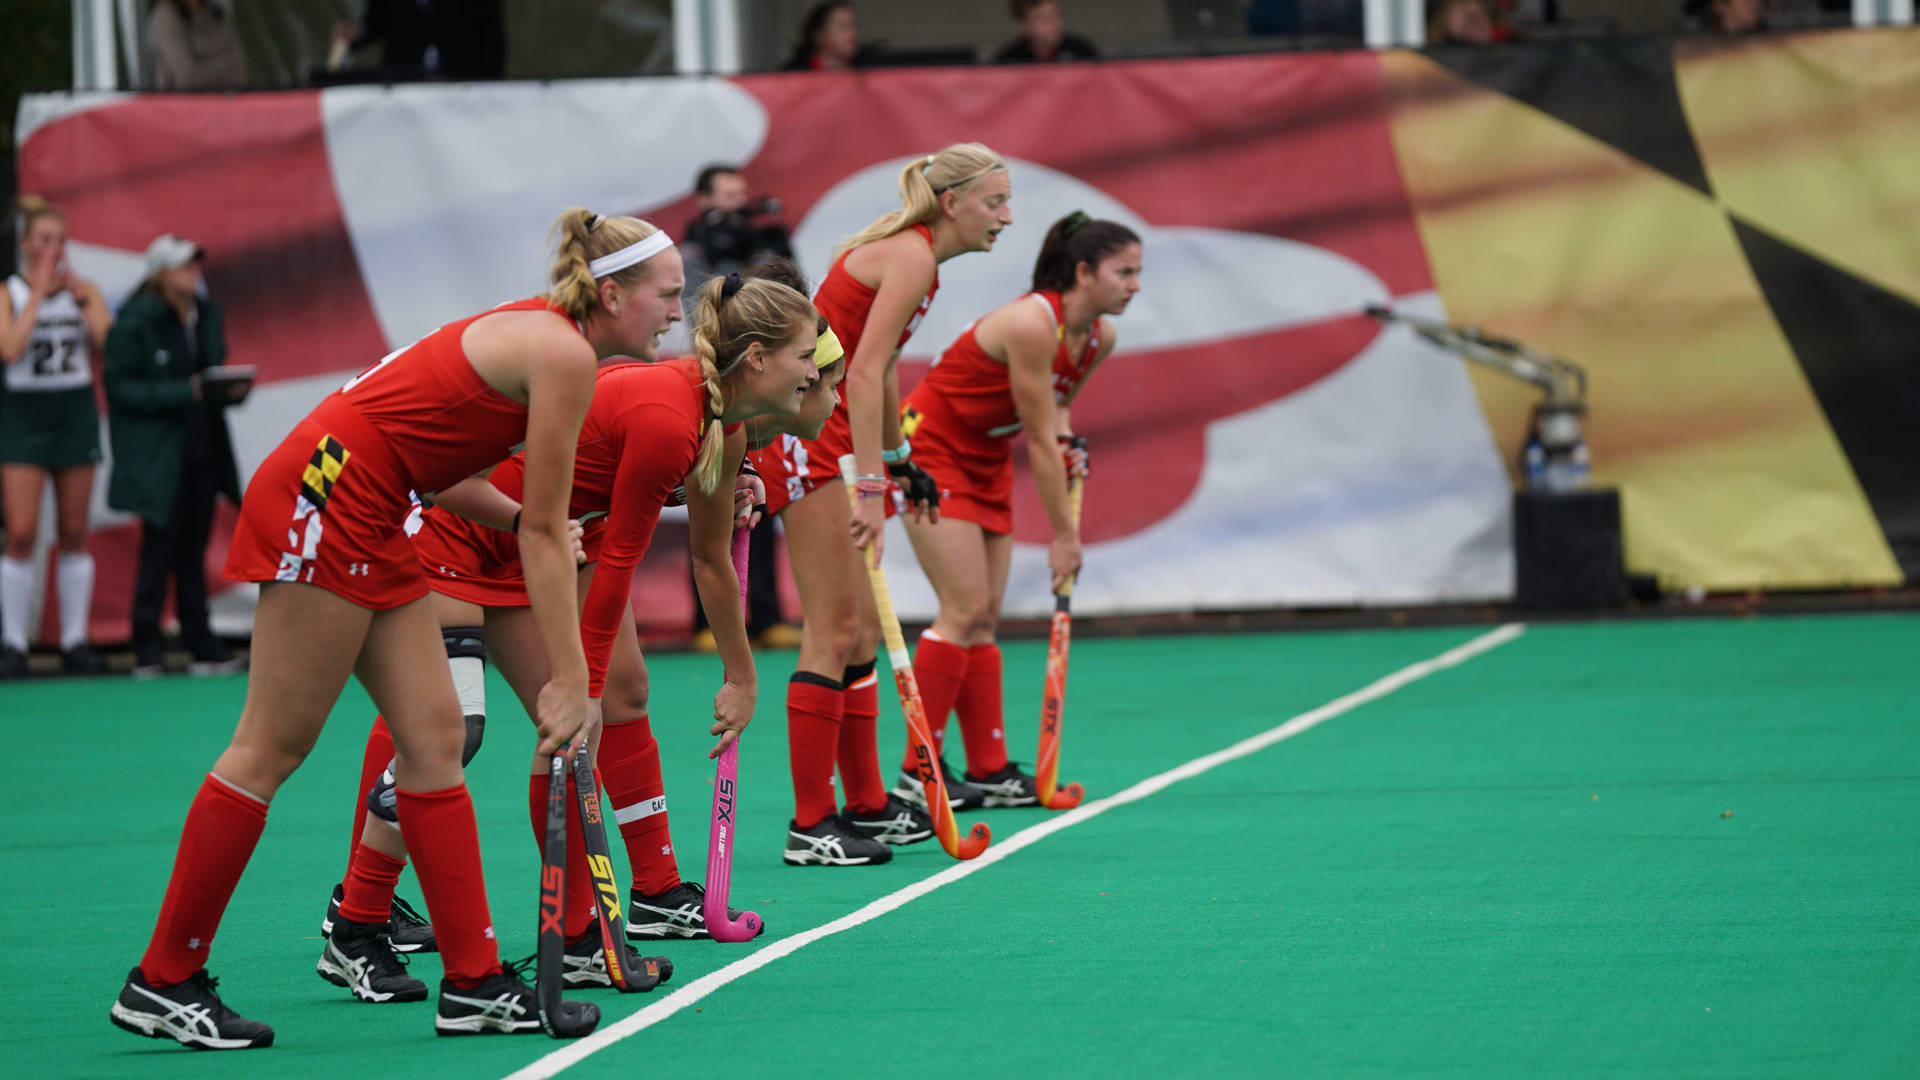 Determined Field Hockey Players Gearing Up for the Match Wallpaper